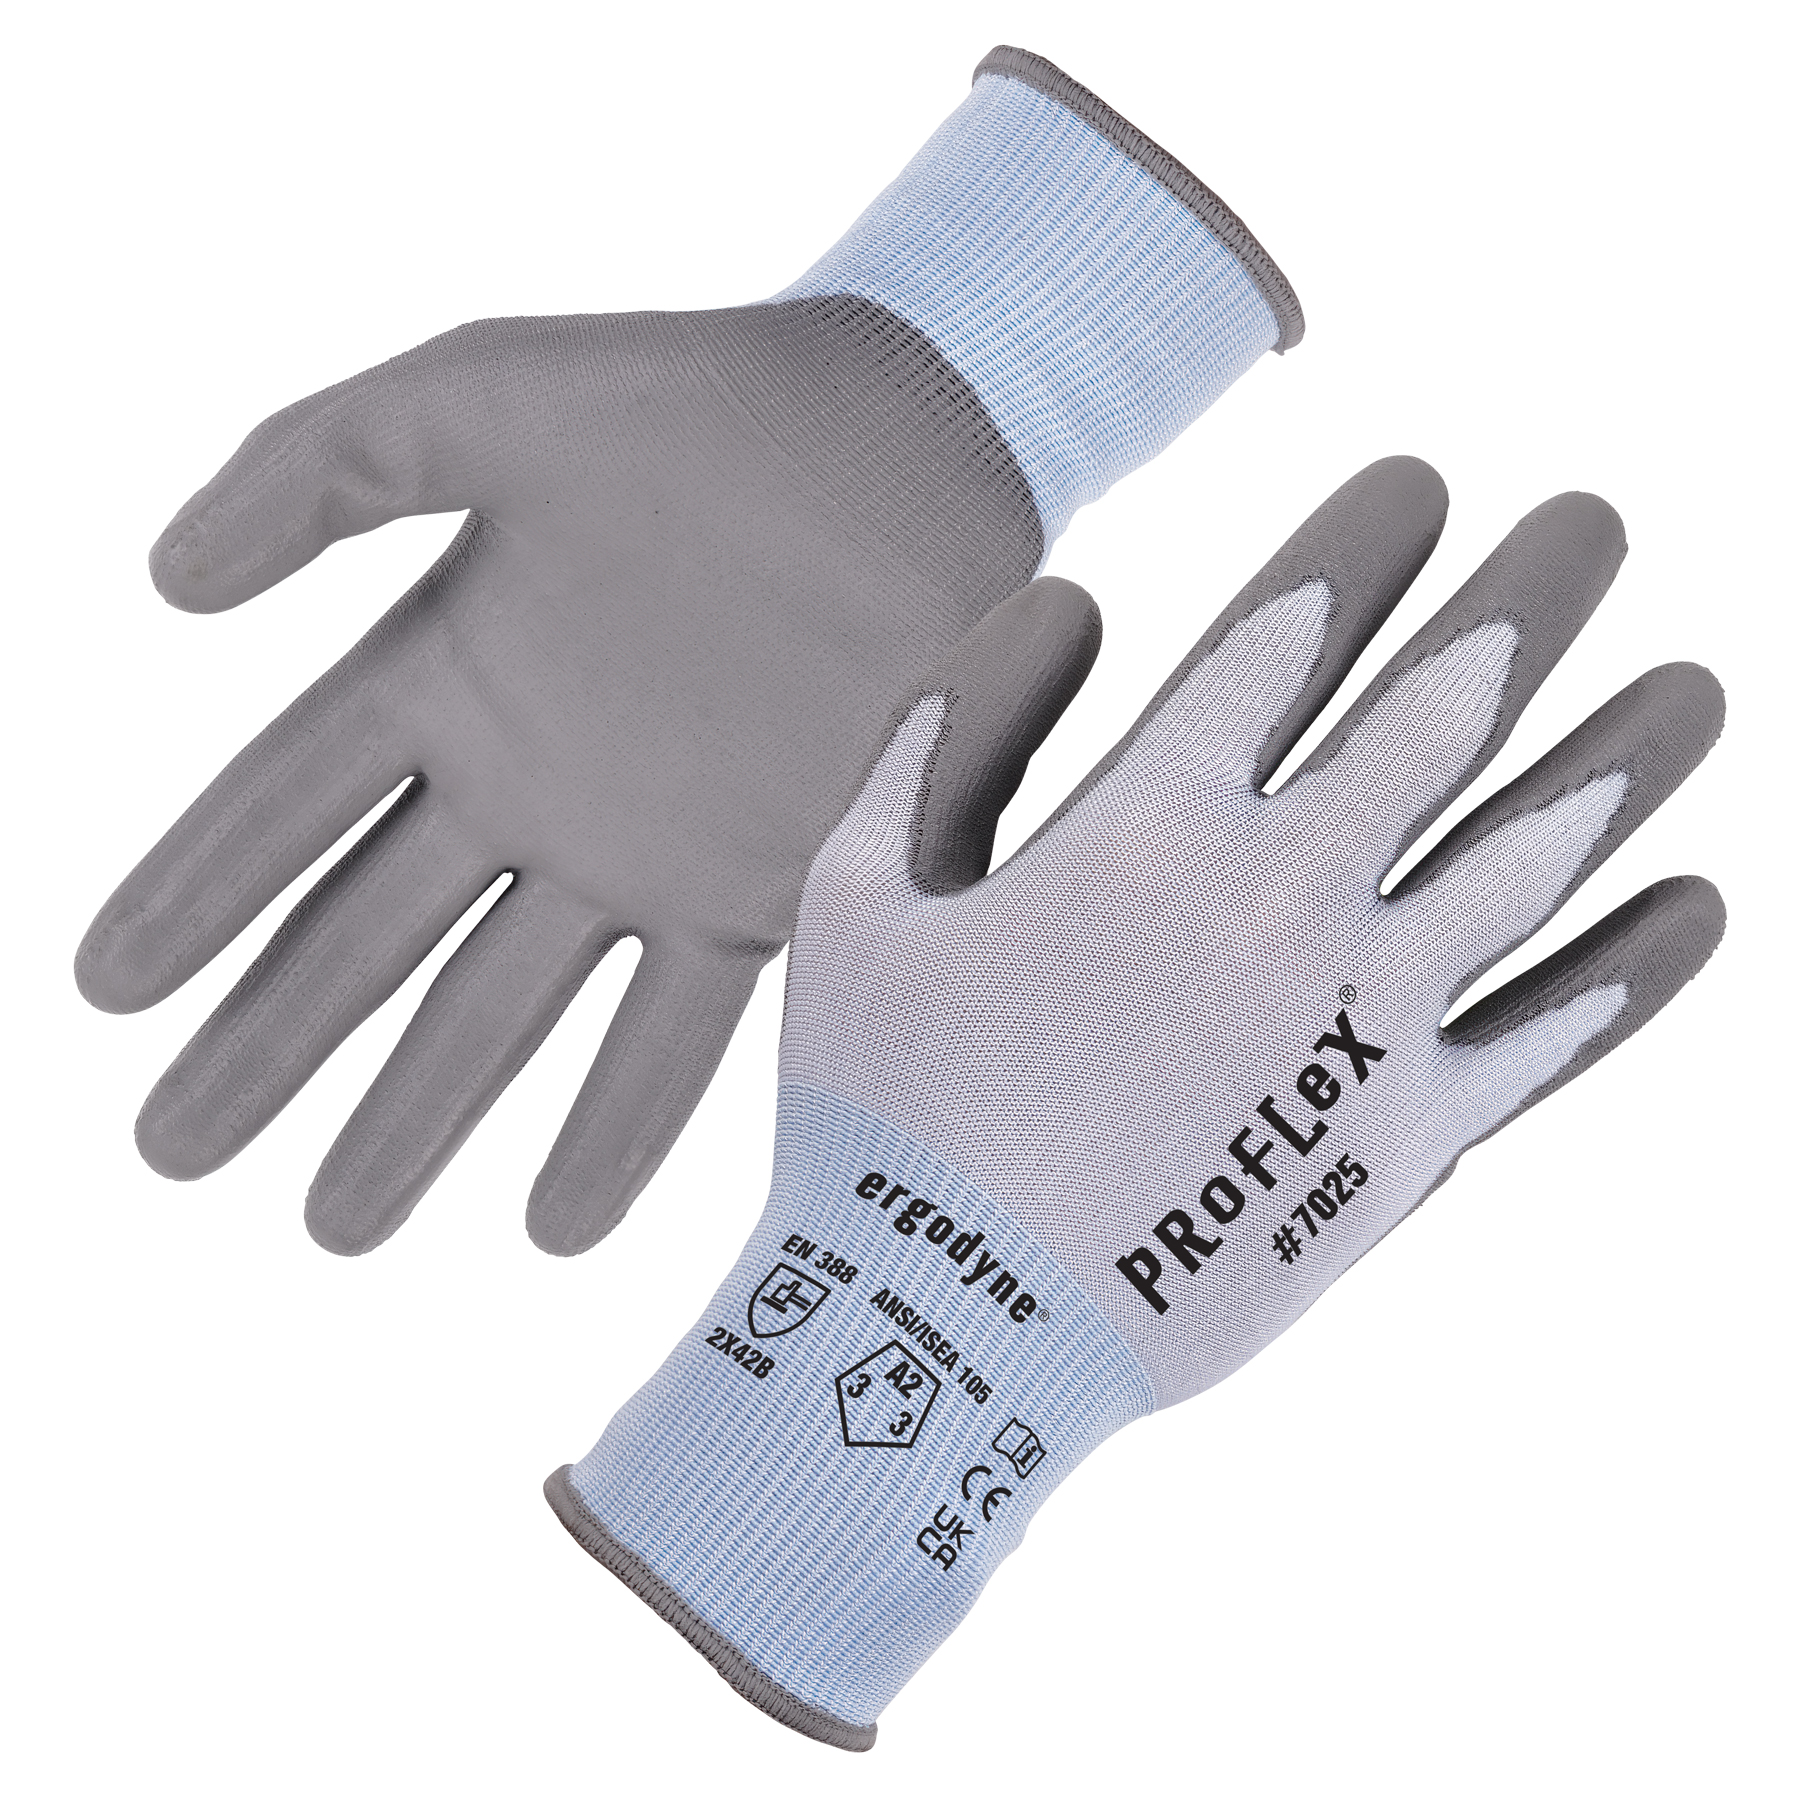 Cut Resistant Knit Work Gloves (pack of 12 gloves) / Gray